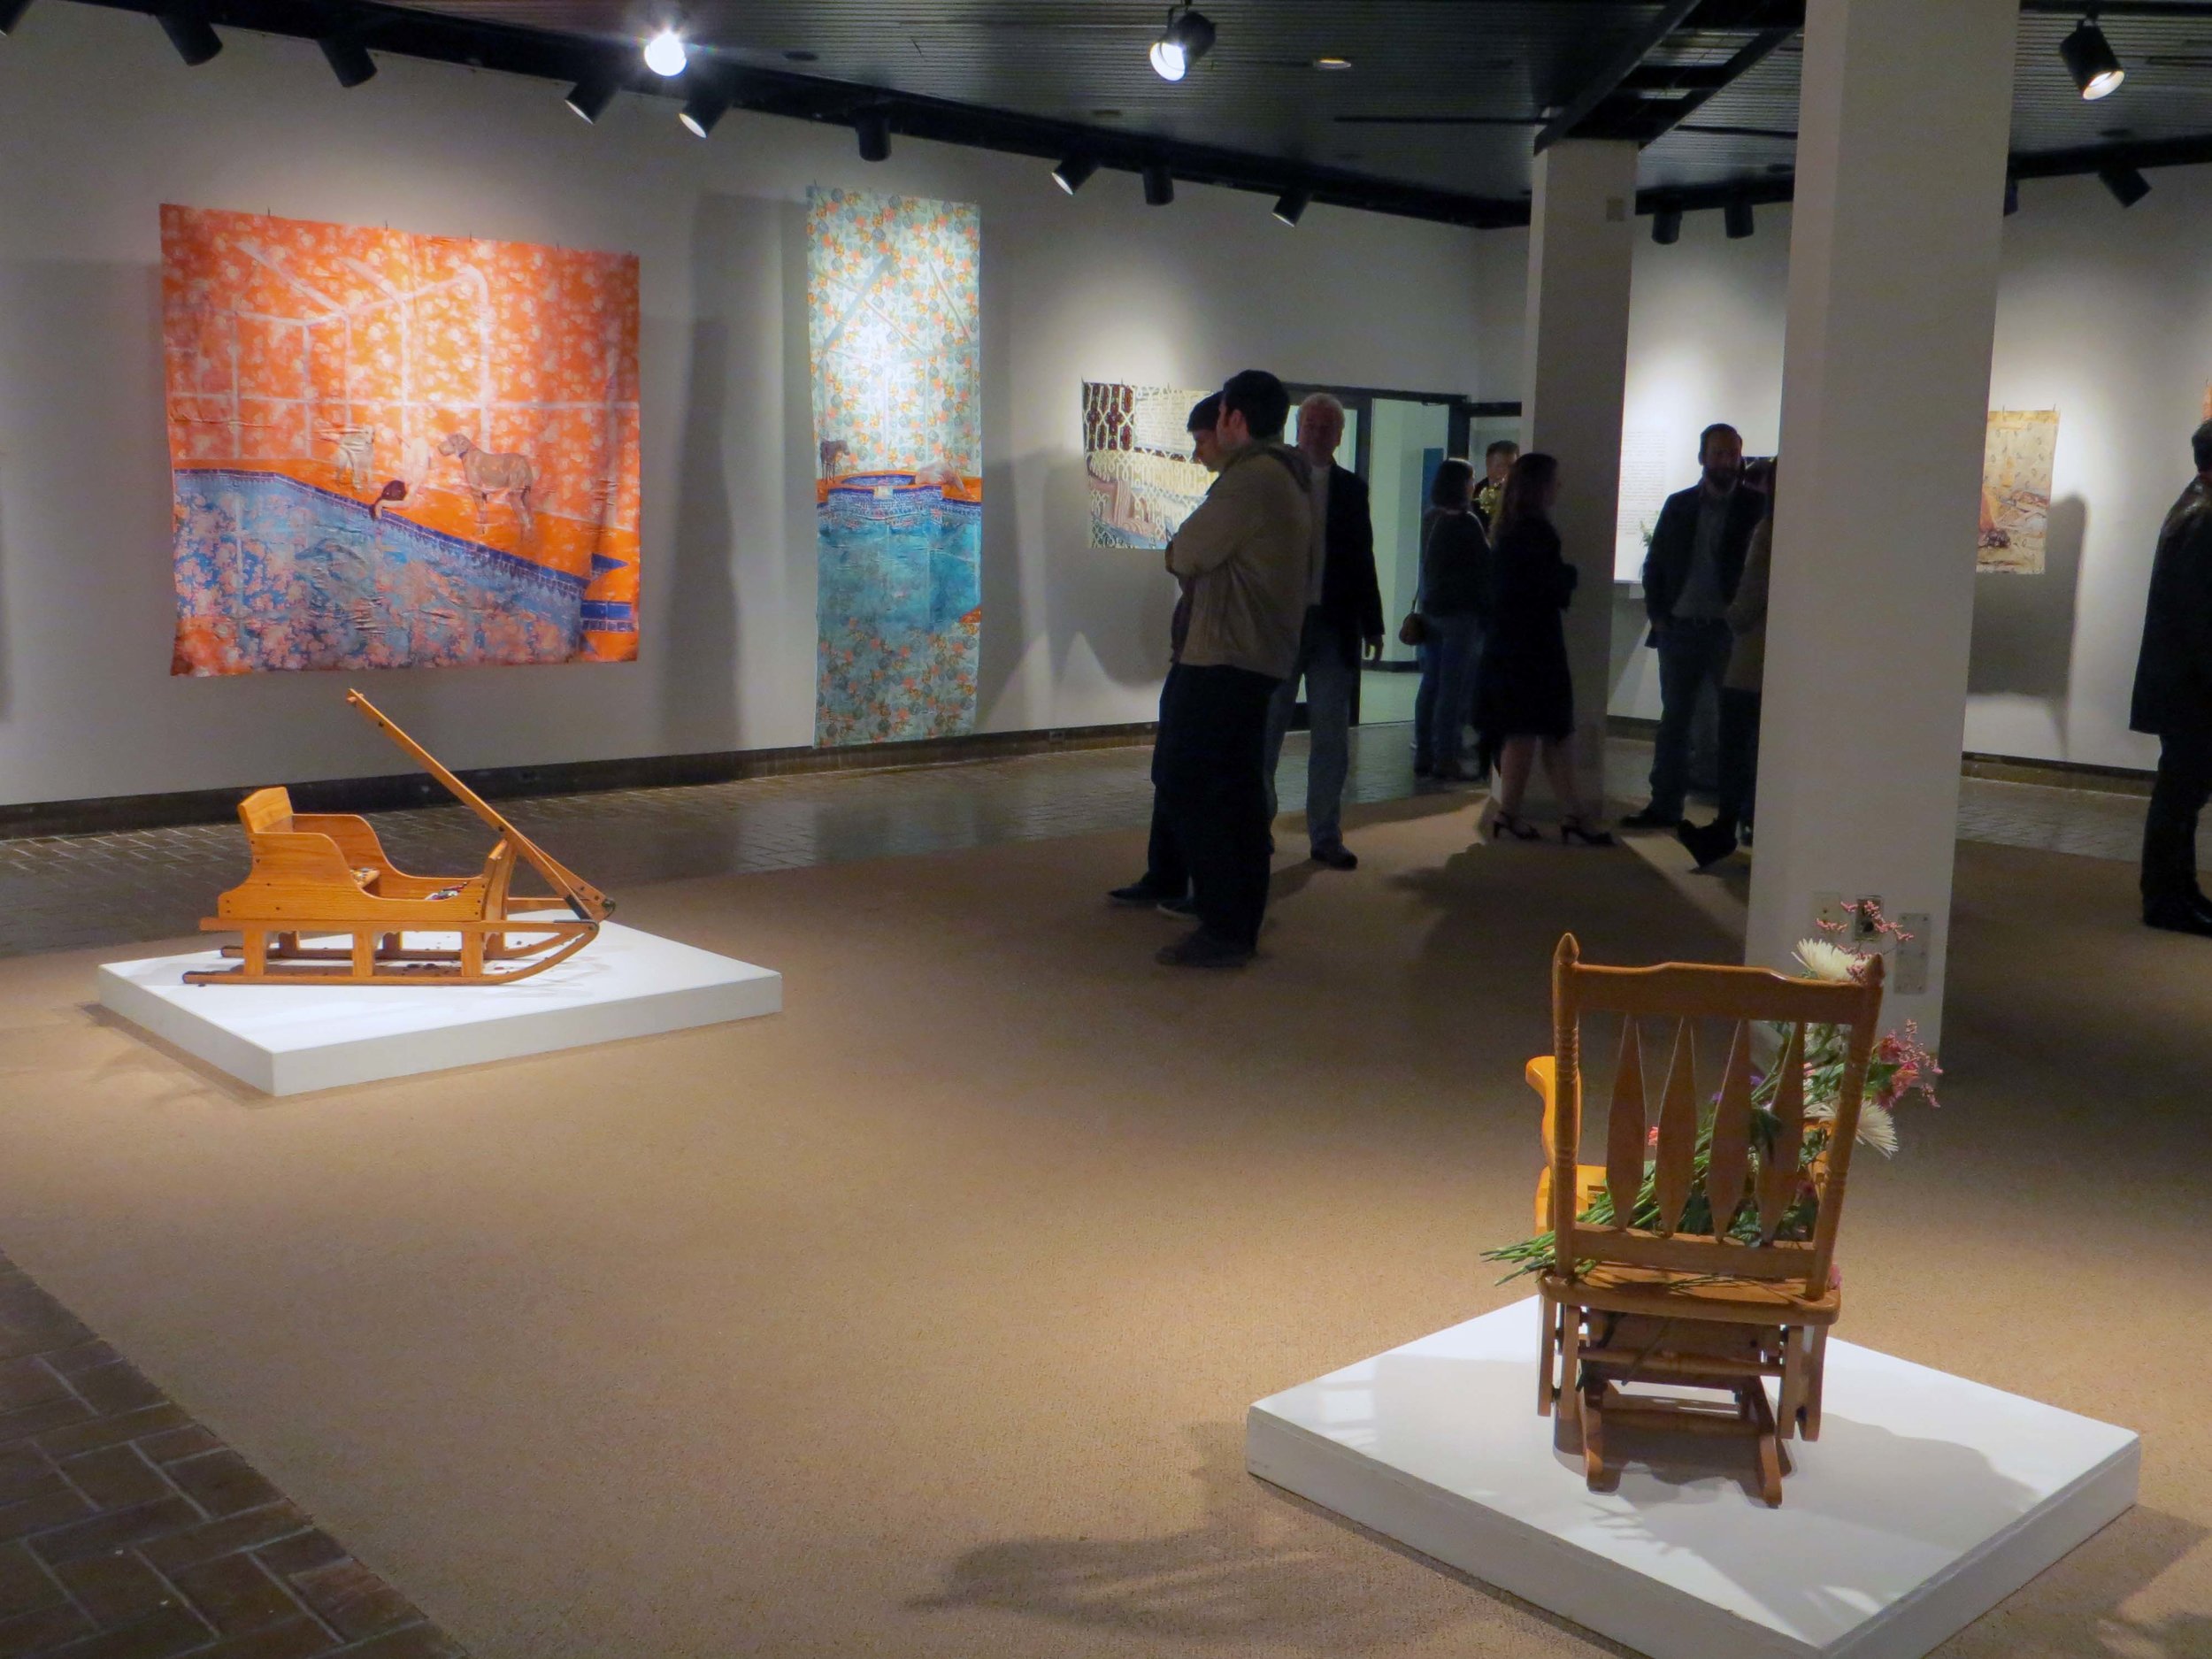  S. Tucker Cooke Gallery, "Fabricating Thresholds: Floral Femininity," Asheville, NC 